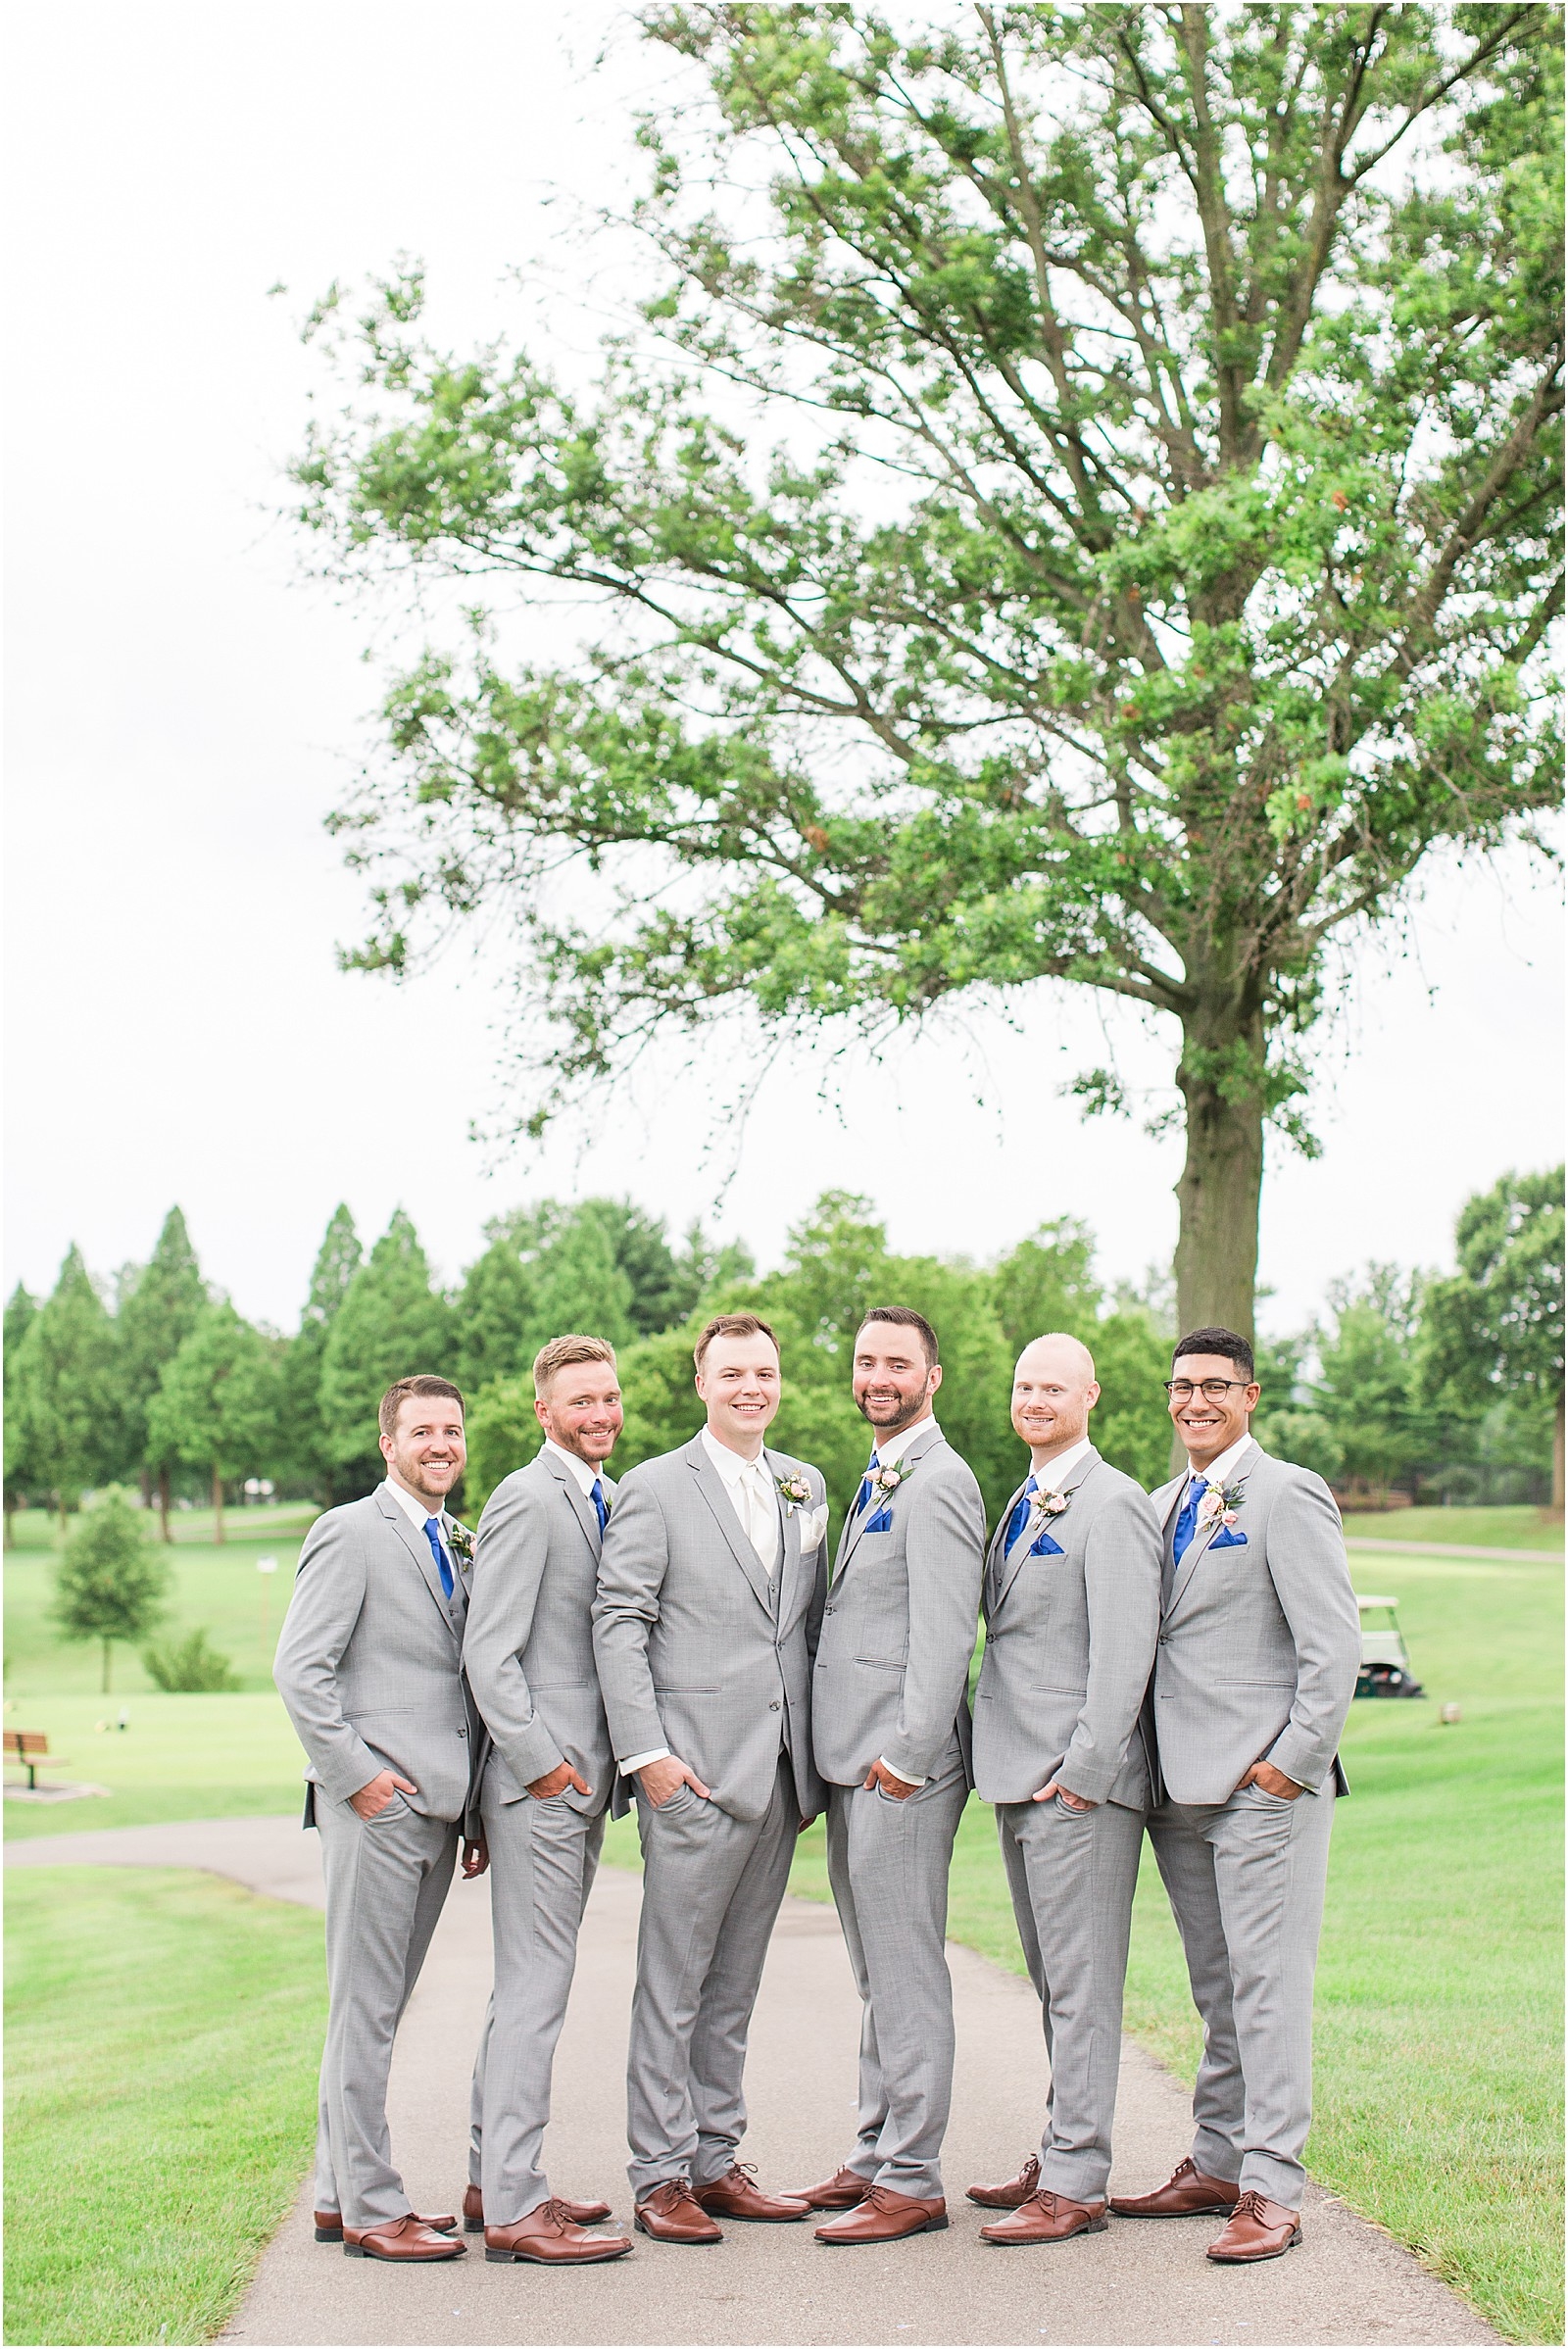 An Evansville County Club Wedding | Abby and Stratton 071.jpg